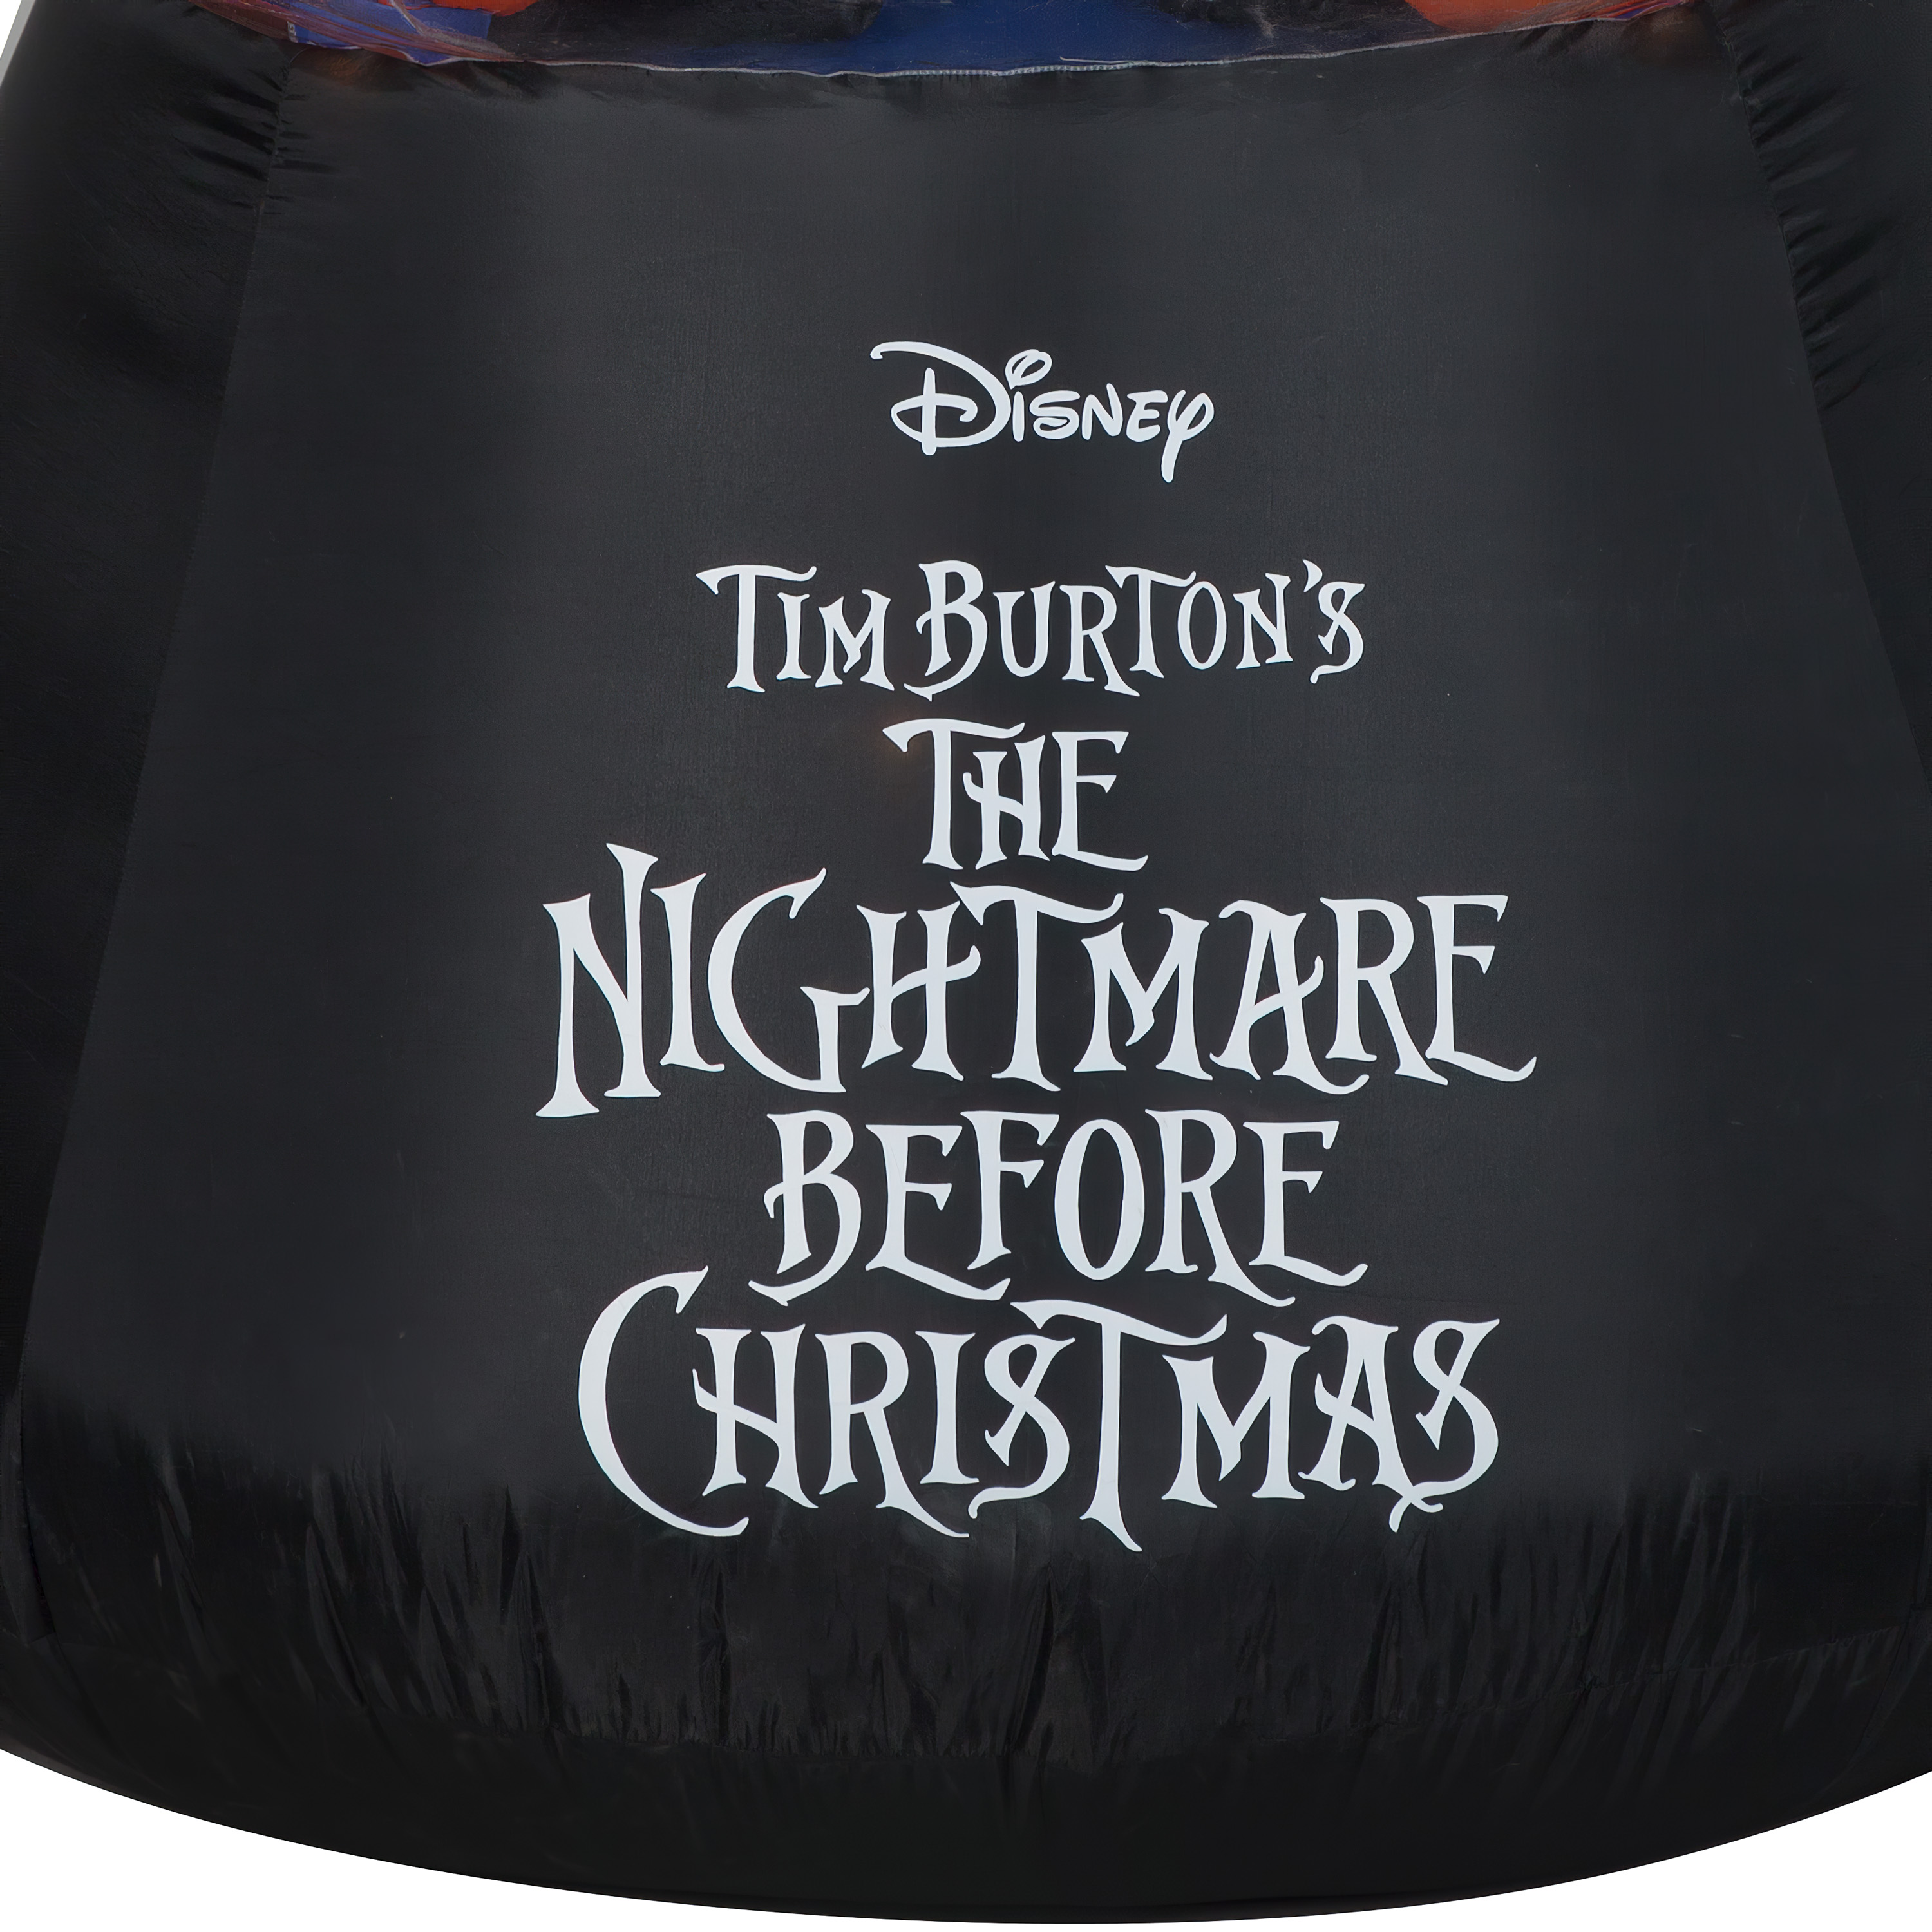 Halloween Airblown Inflatable Nightmare Before Christmas Jack and Sally Globe Scene - image 5 of 5